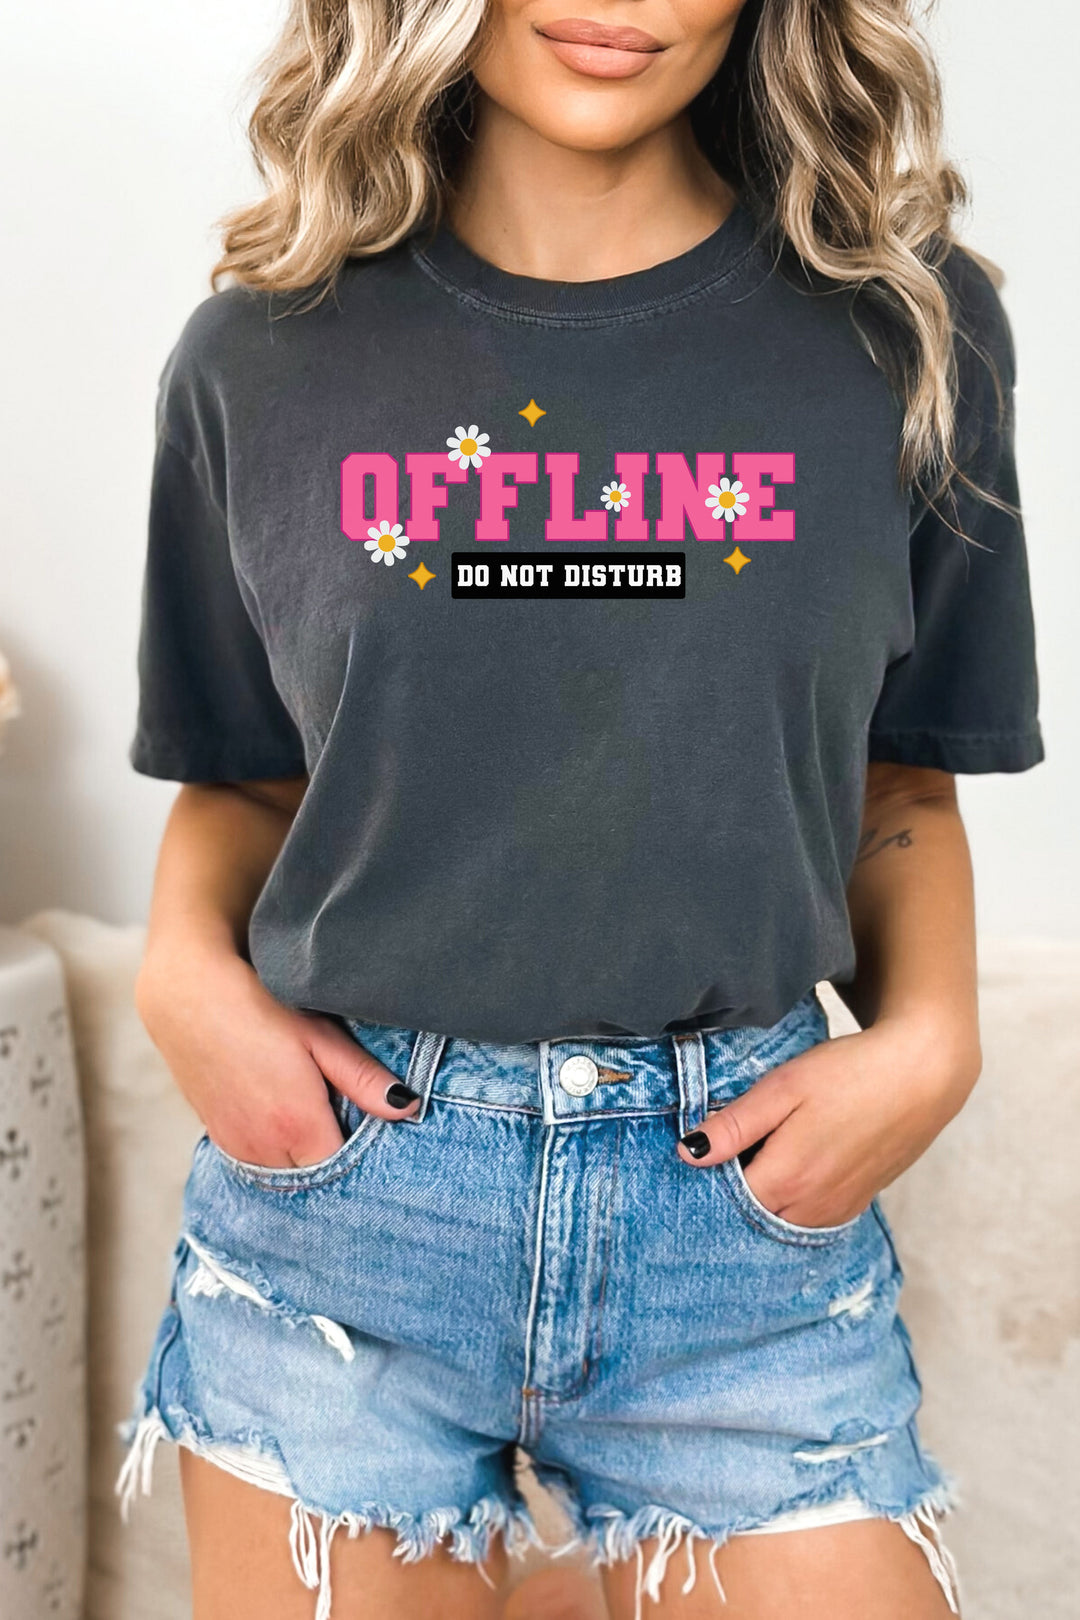 Glamfox - Offline DND Graphic Tee [More Colors Available]